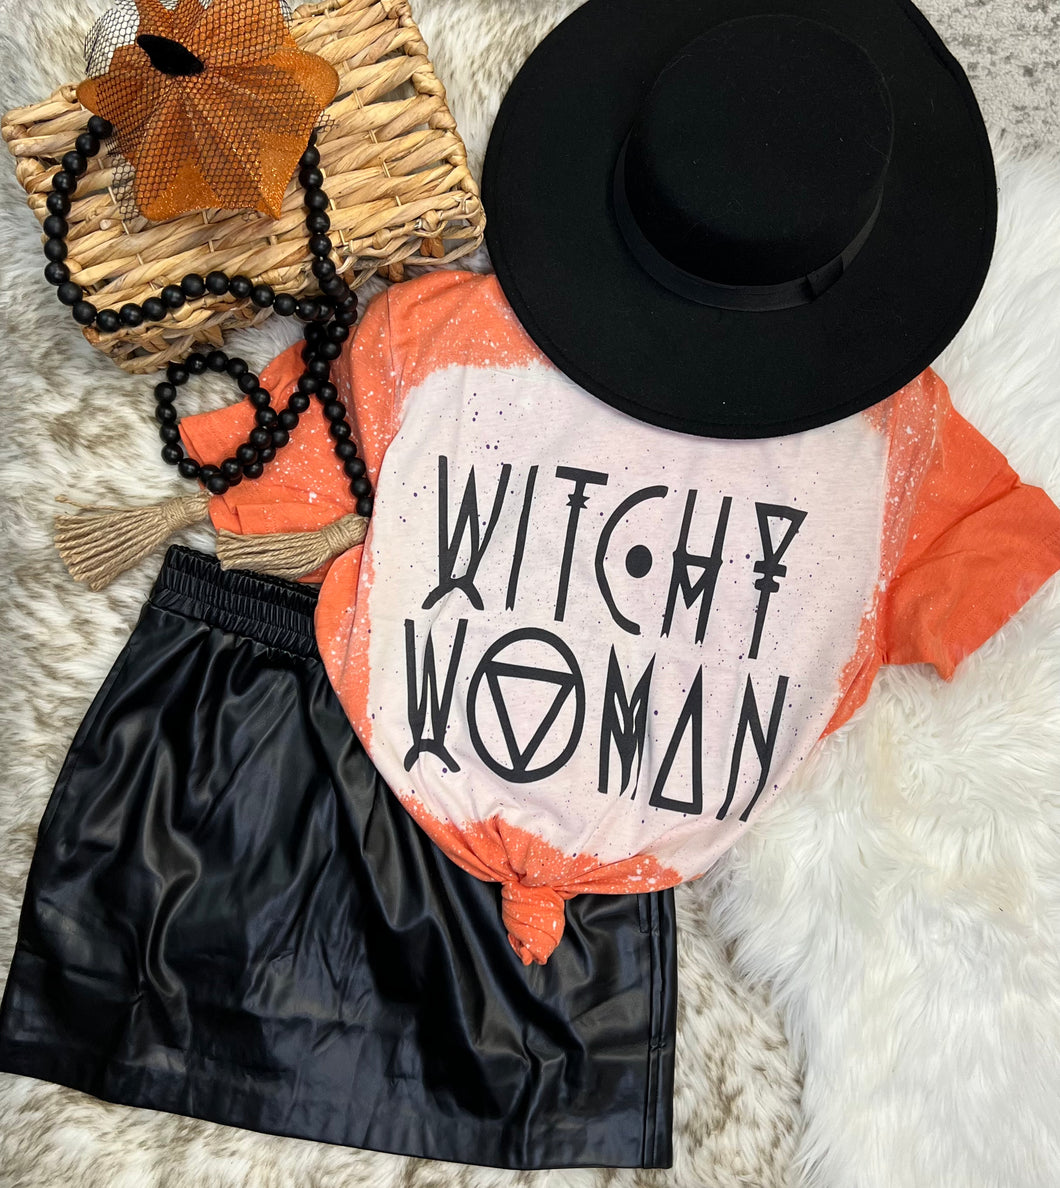 Witchy Woman bleached graphic tshirt